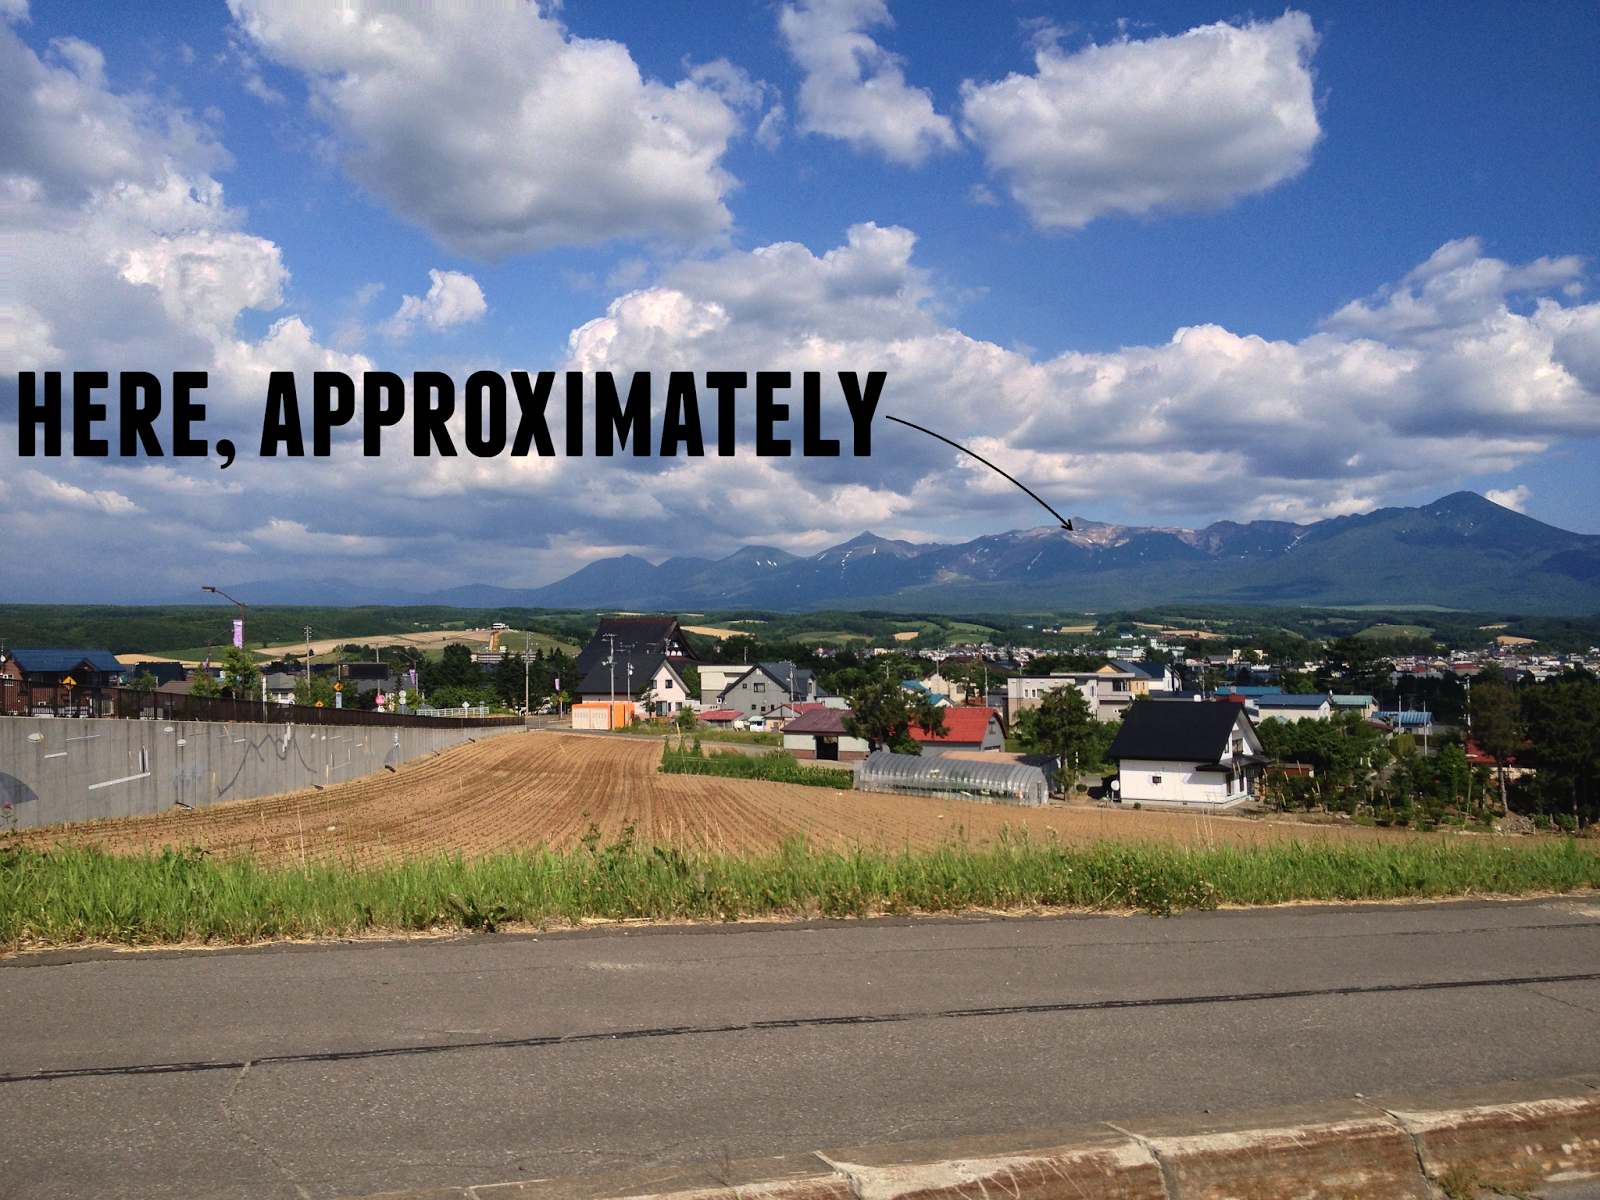 The Tokachi Mountains, with a helpful caption reading